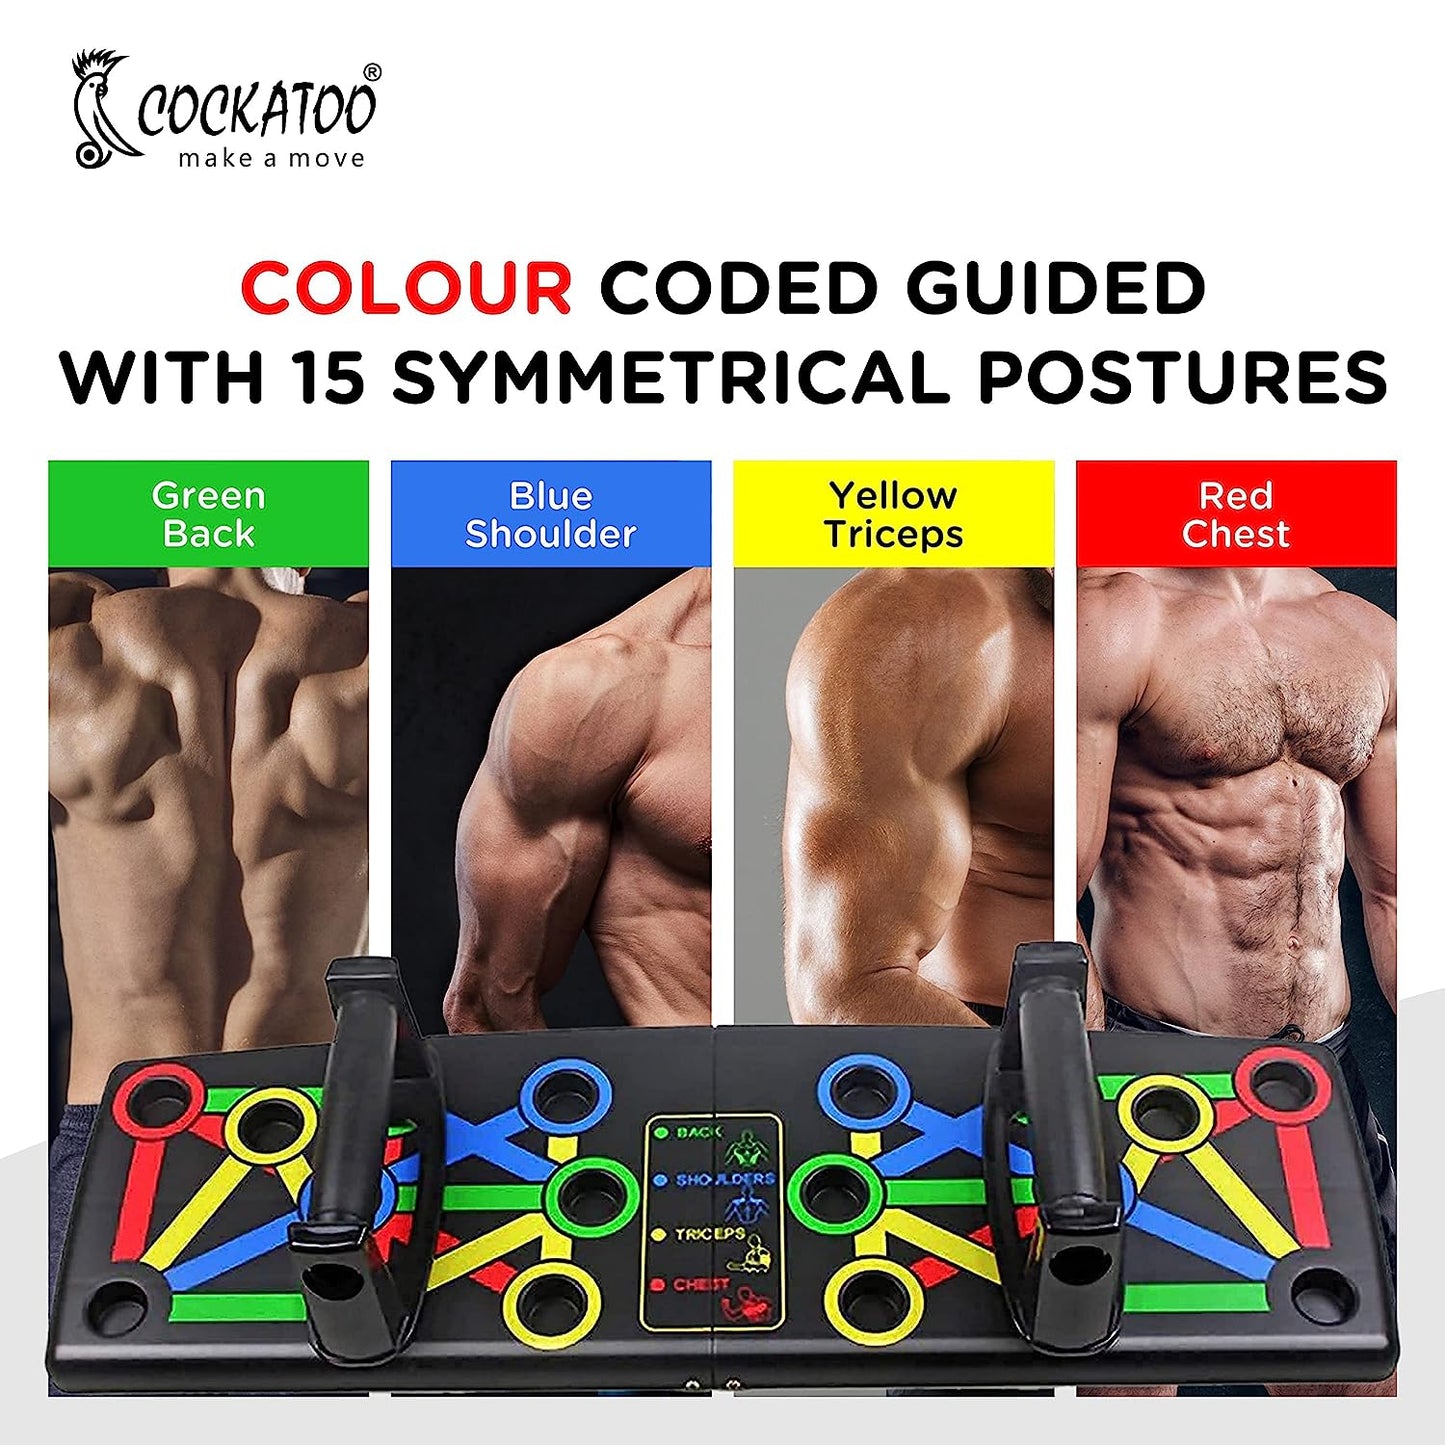 Cockatoo ECO 15 in 1 Home Workout Pushup Board,Pushup Bar System|| ABS Material|| 1 Year Warranty